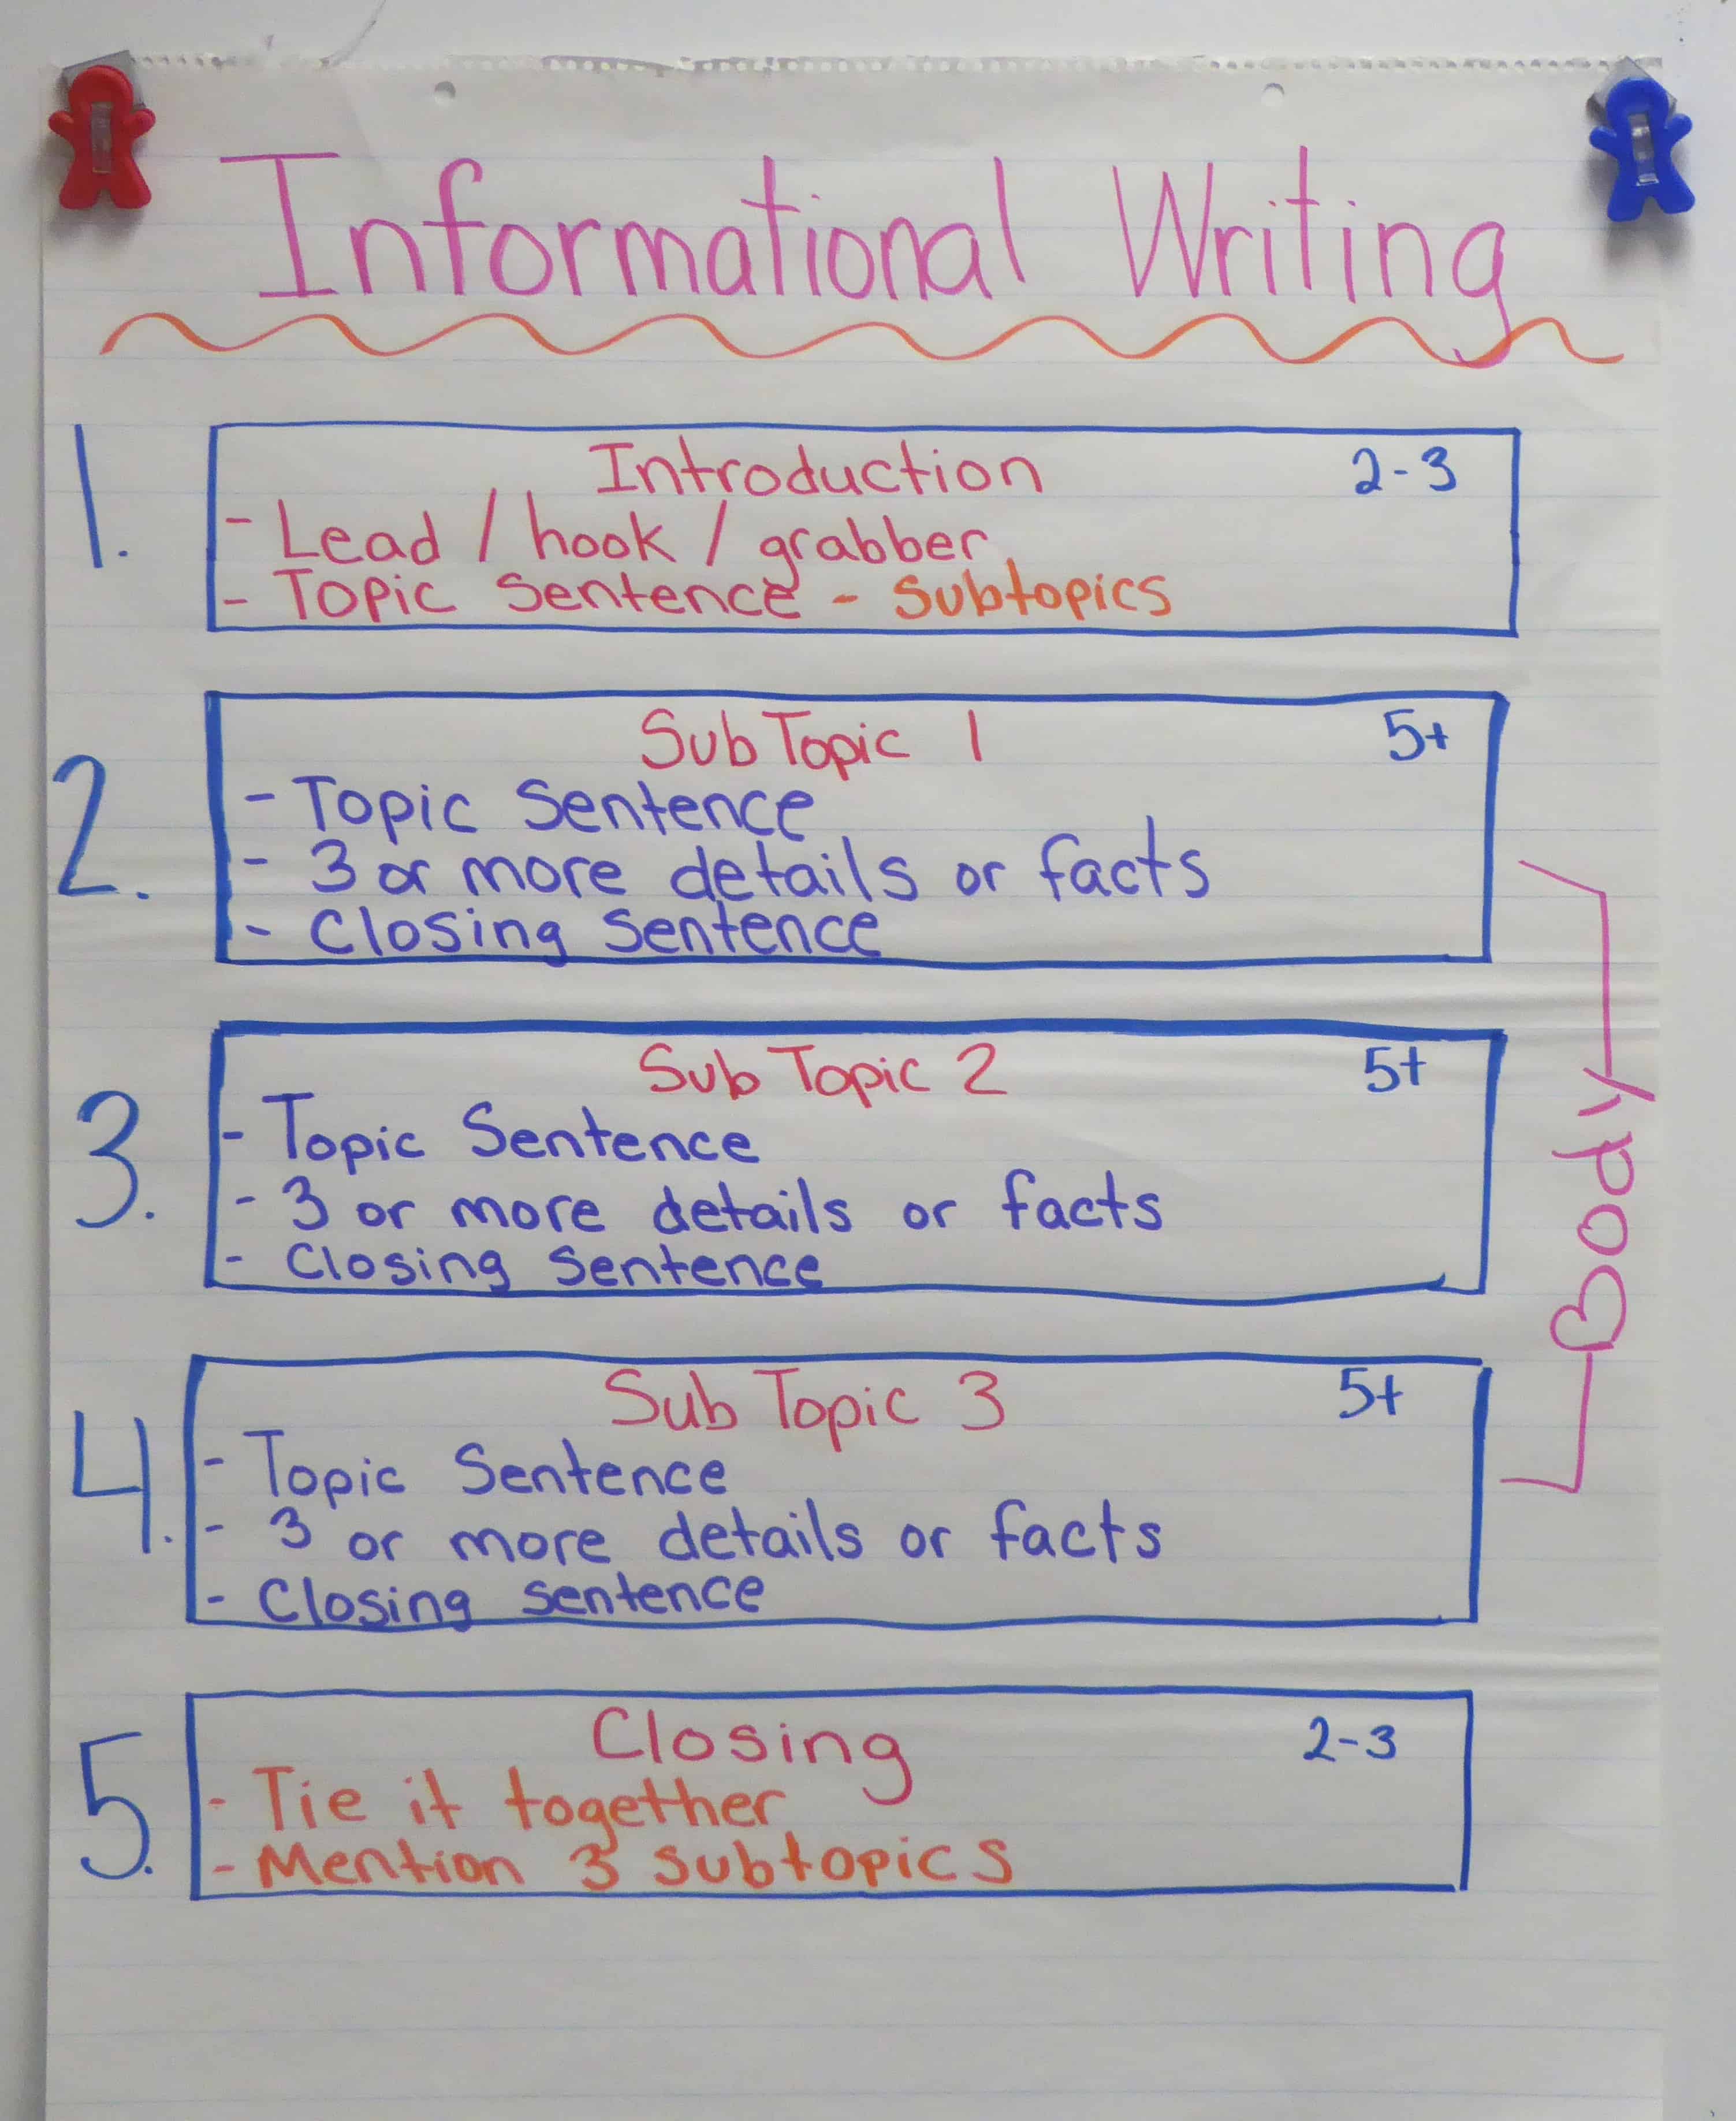 Topic Chart For Writing